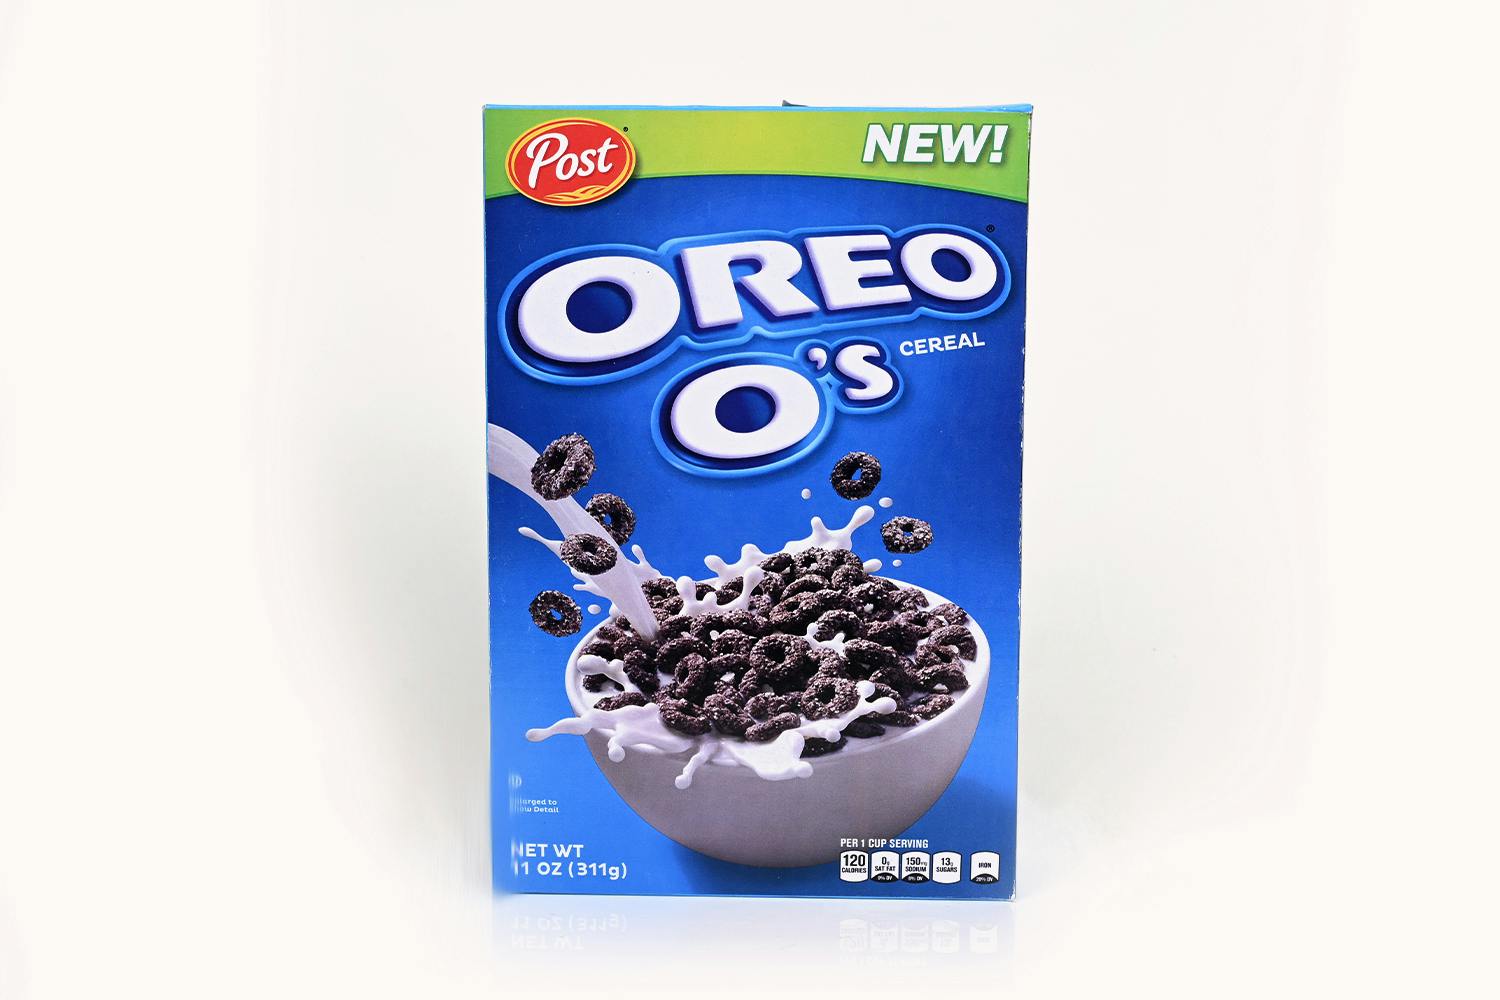 Post Oreo Cereal